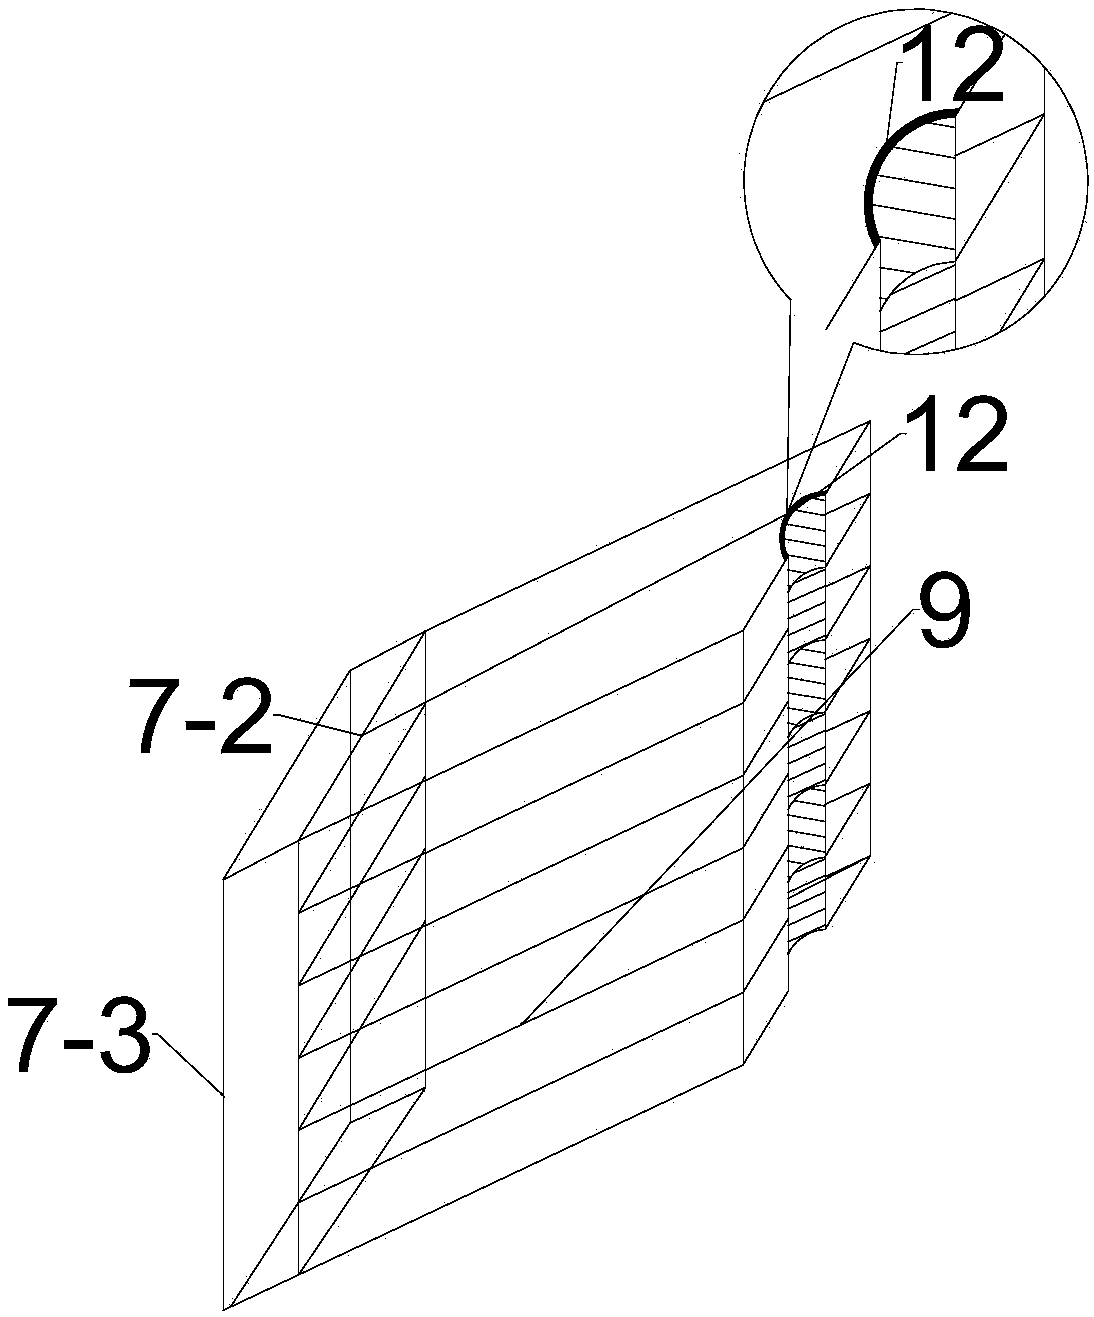 Device and method for testing work performance of anchor rod cable capable of simulating rock layer fracture and separation on basis of electromagnetic effects